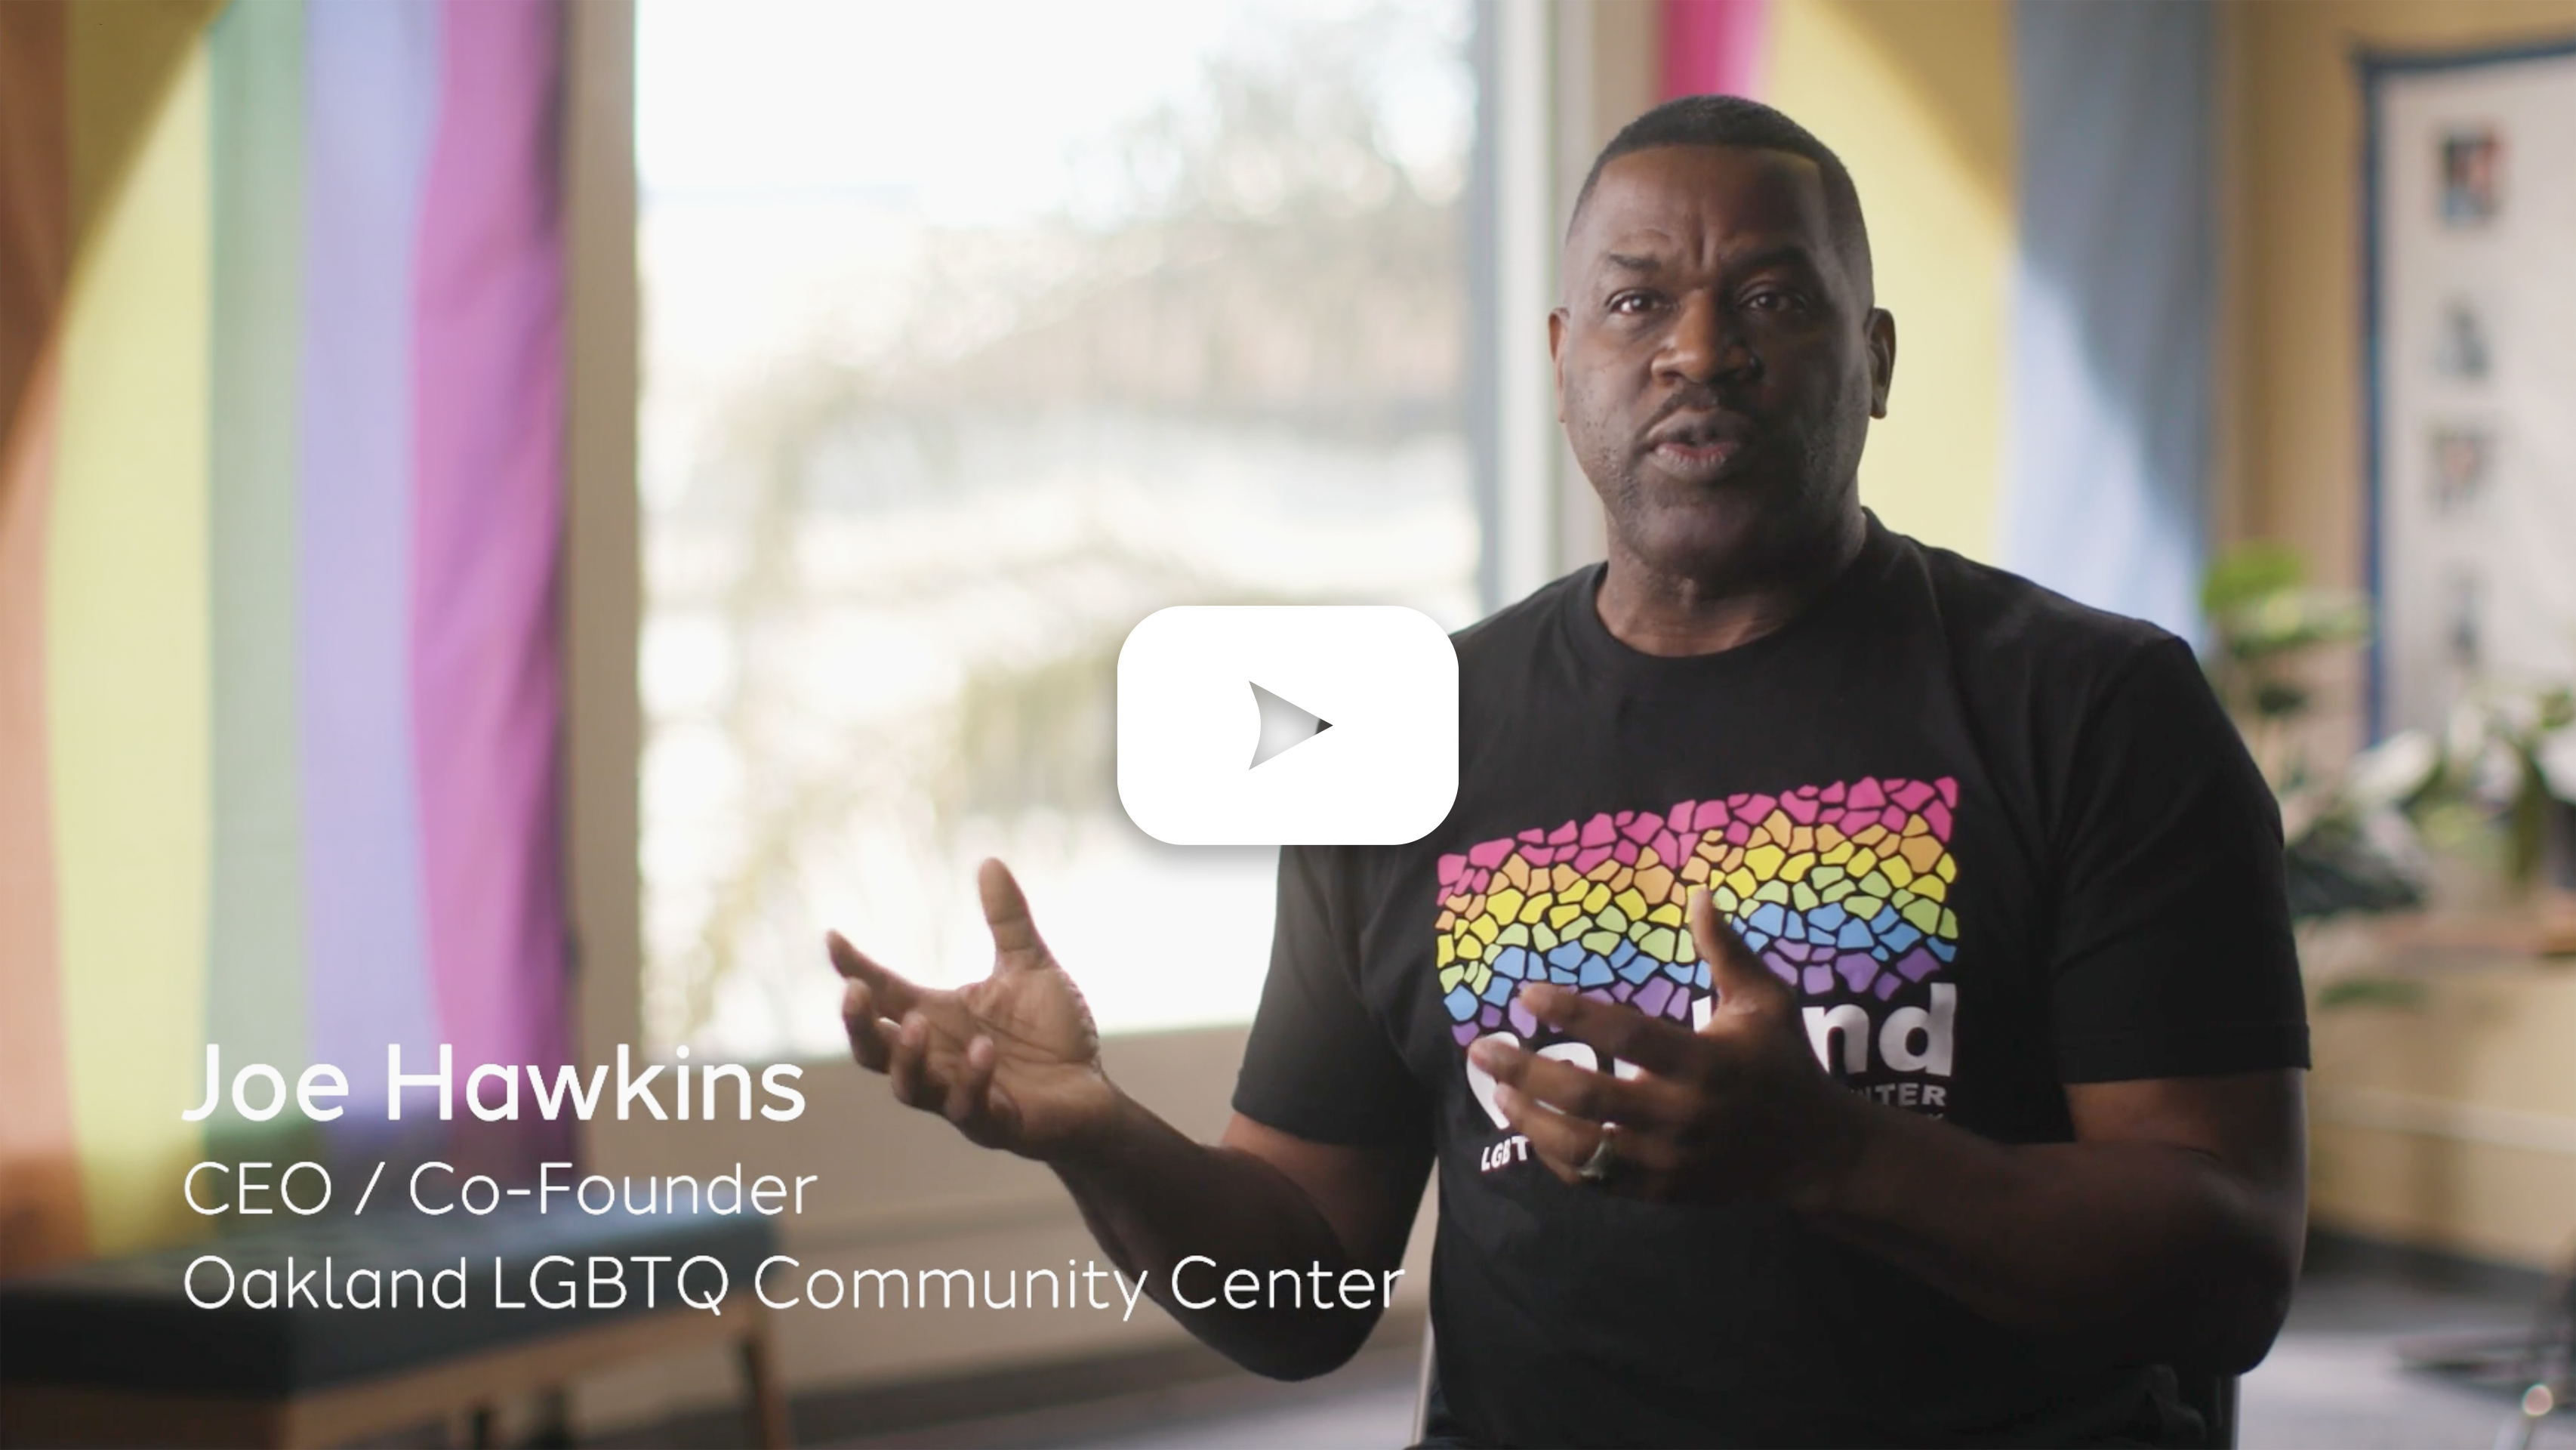 Abounding Prosperity organization provides HIV services in communities in Dallas, Texas.